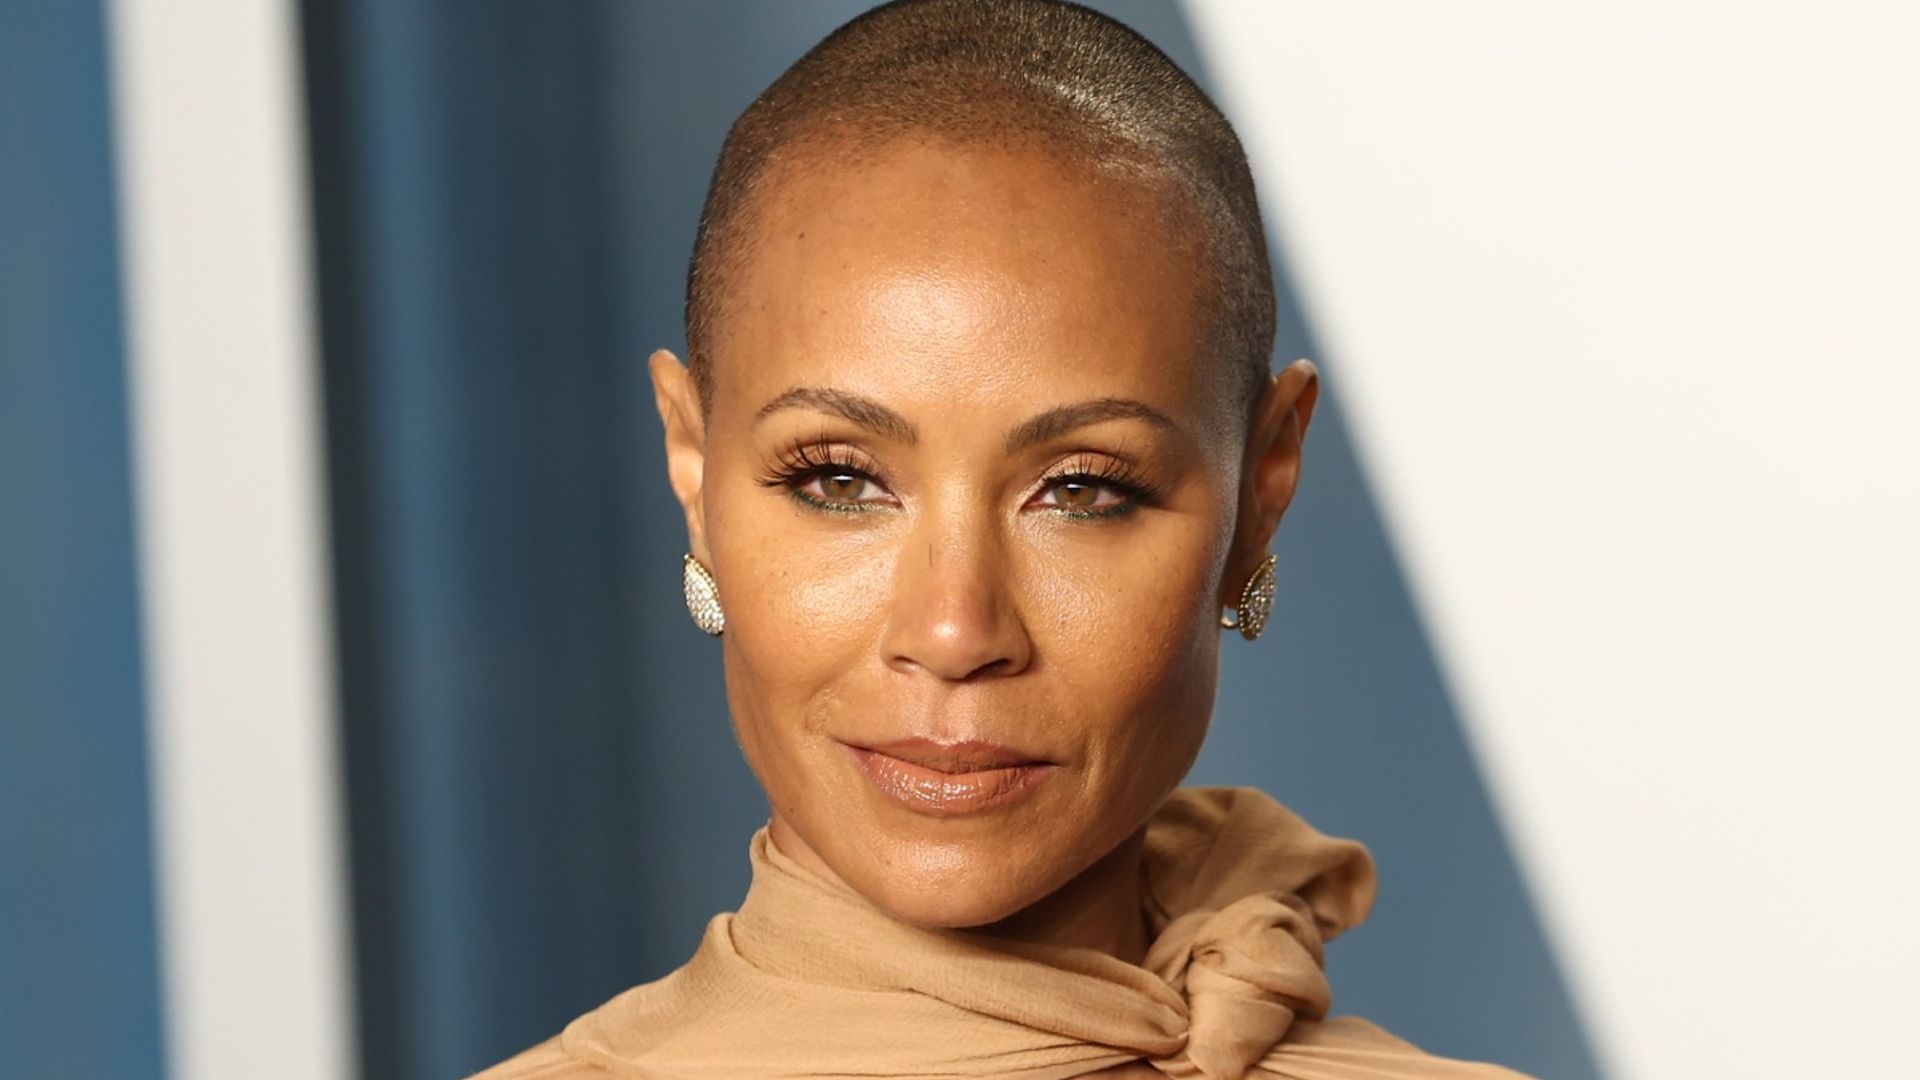 Jada Pinkett Smith Confesses She Crossed The Line With Will Smiths Ex Wife Sheree Zampino